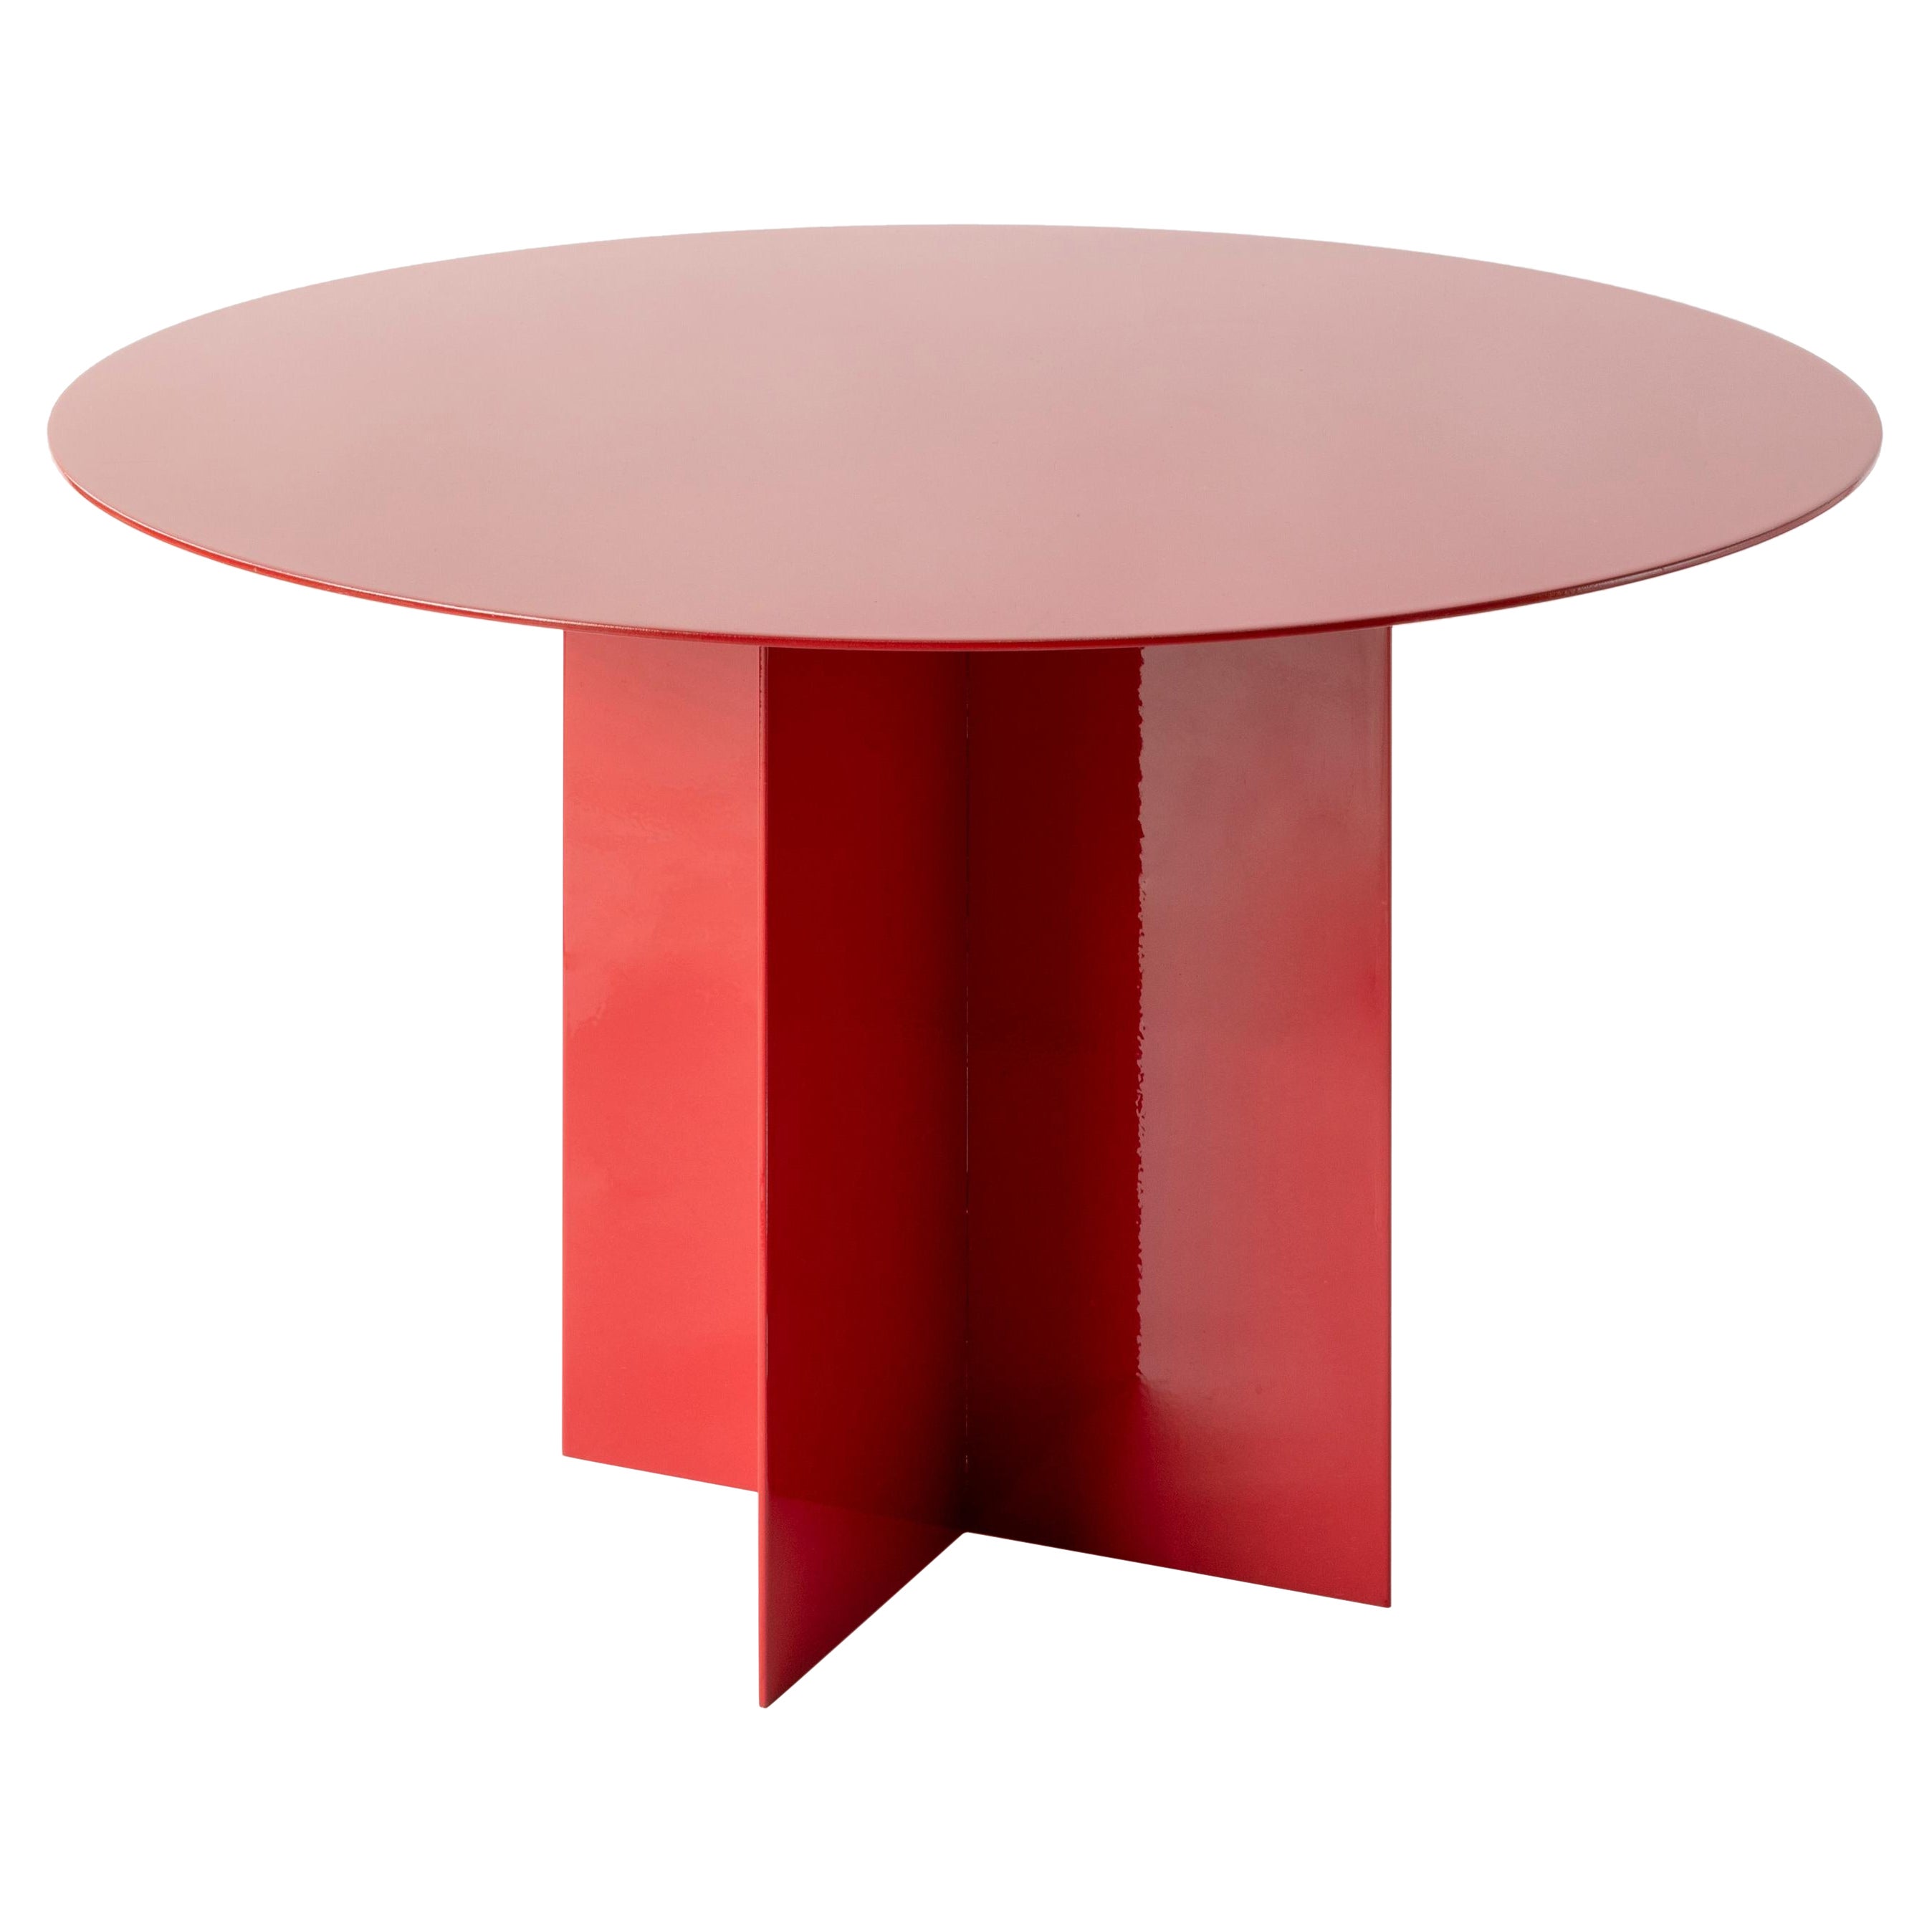 Across Large Round Red Coffee Table by Secondome Edizioni